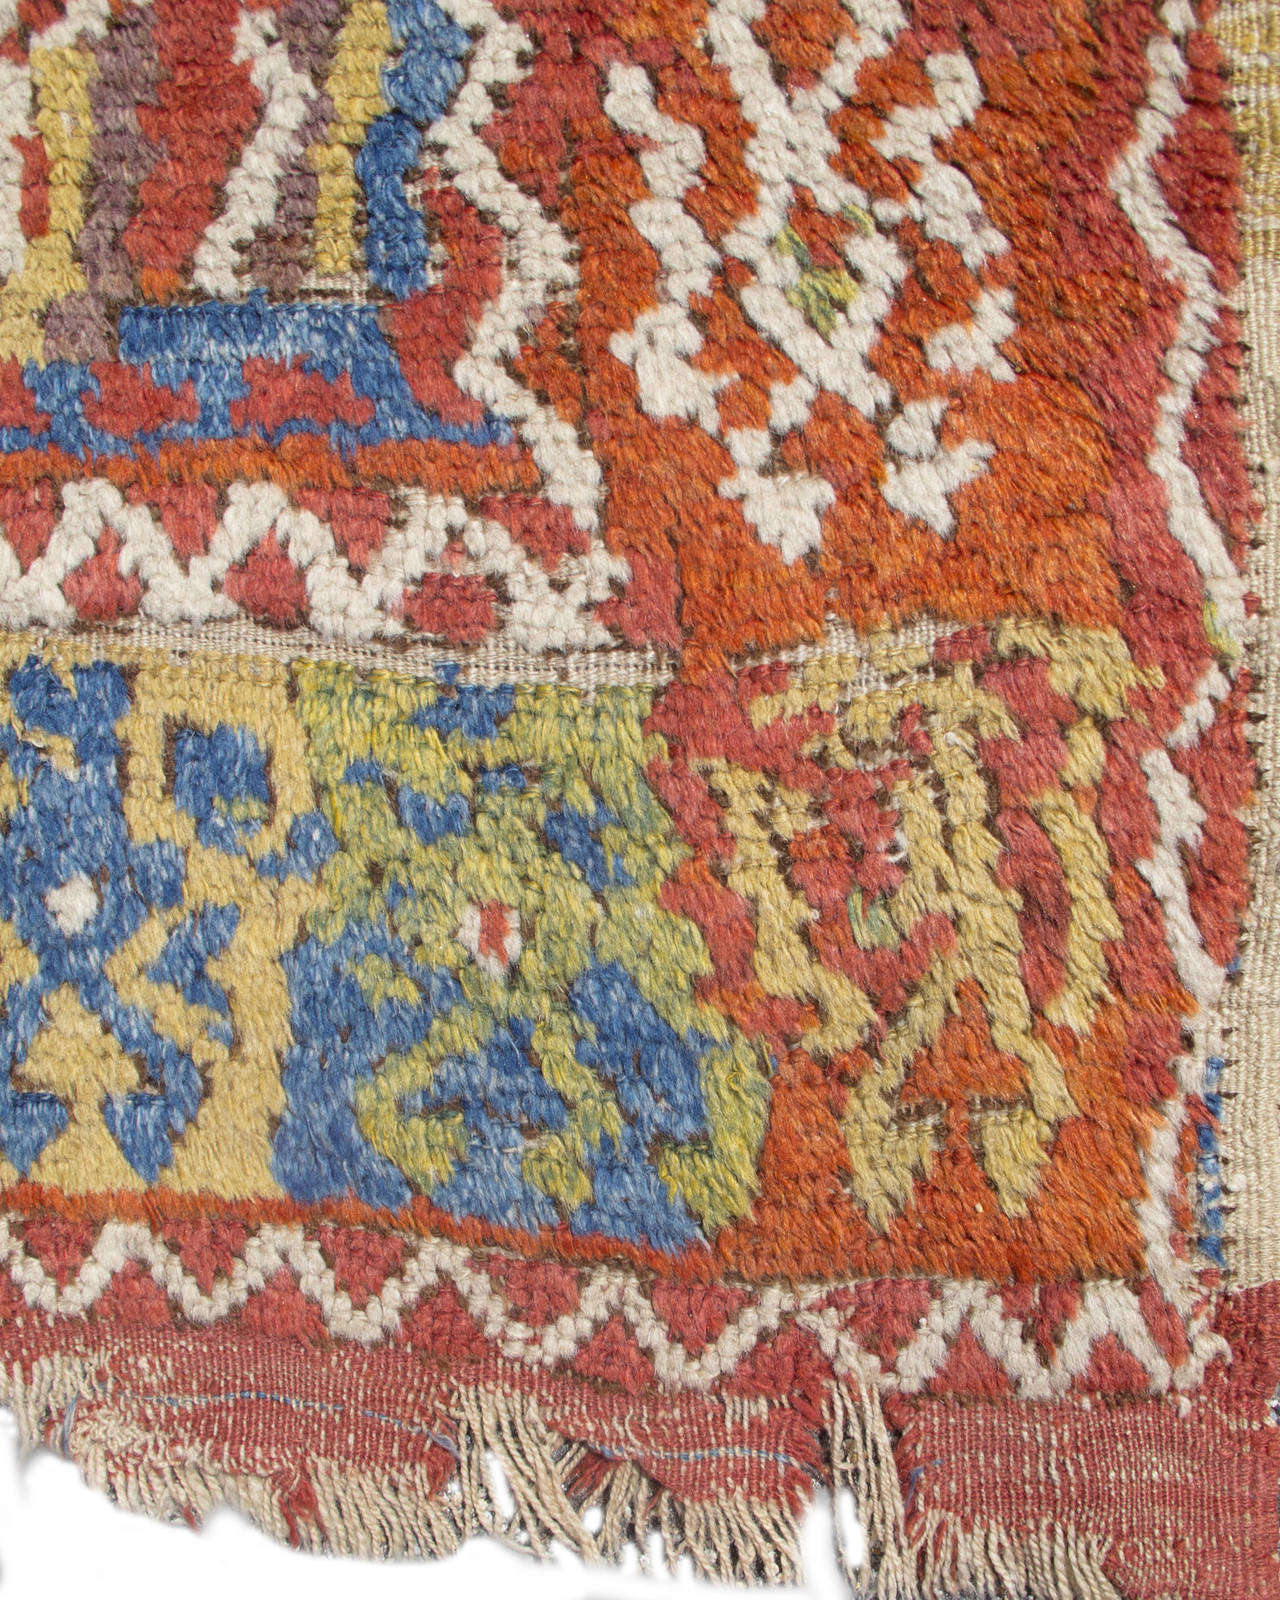 This Konya area, village ‘yatak’, or sleeping rug, is a vibrant example of the dynamic village weaving of the 18th and early 19th centuries. Two beautifully colored stepped medallions center the field--each circumscribed by bright ivory latch-hooks.